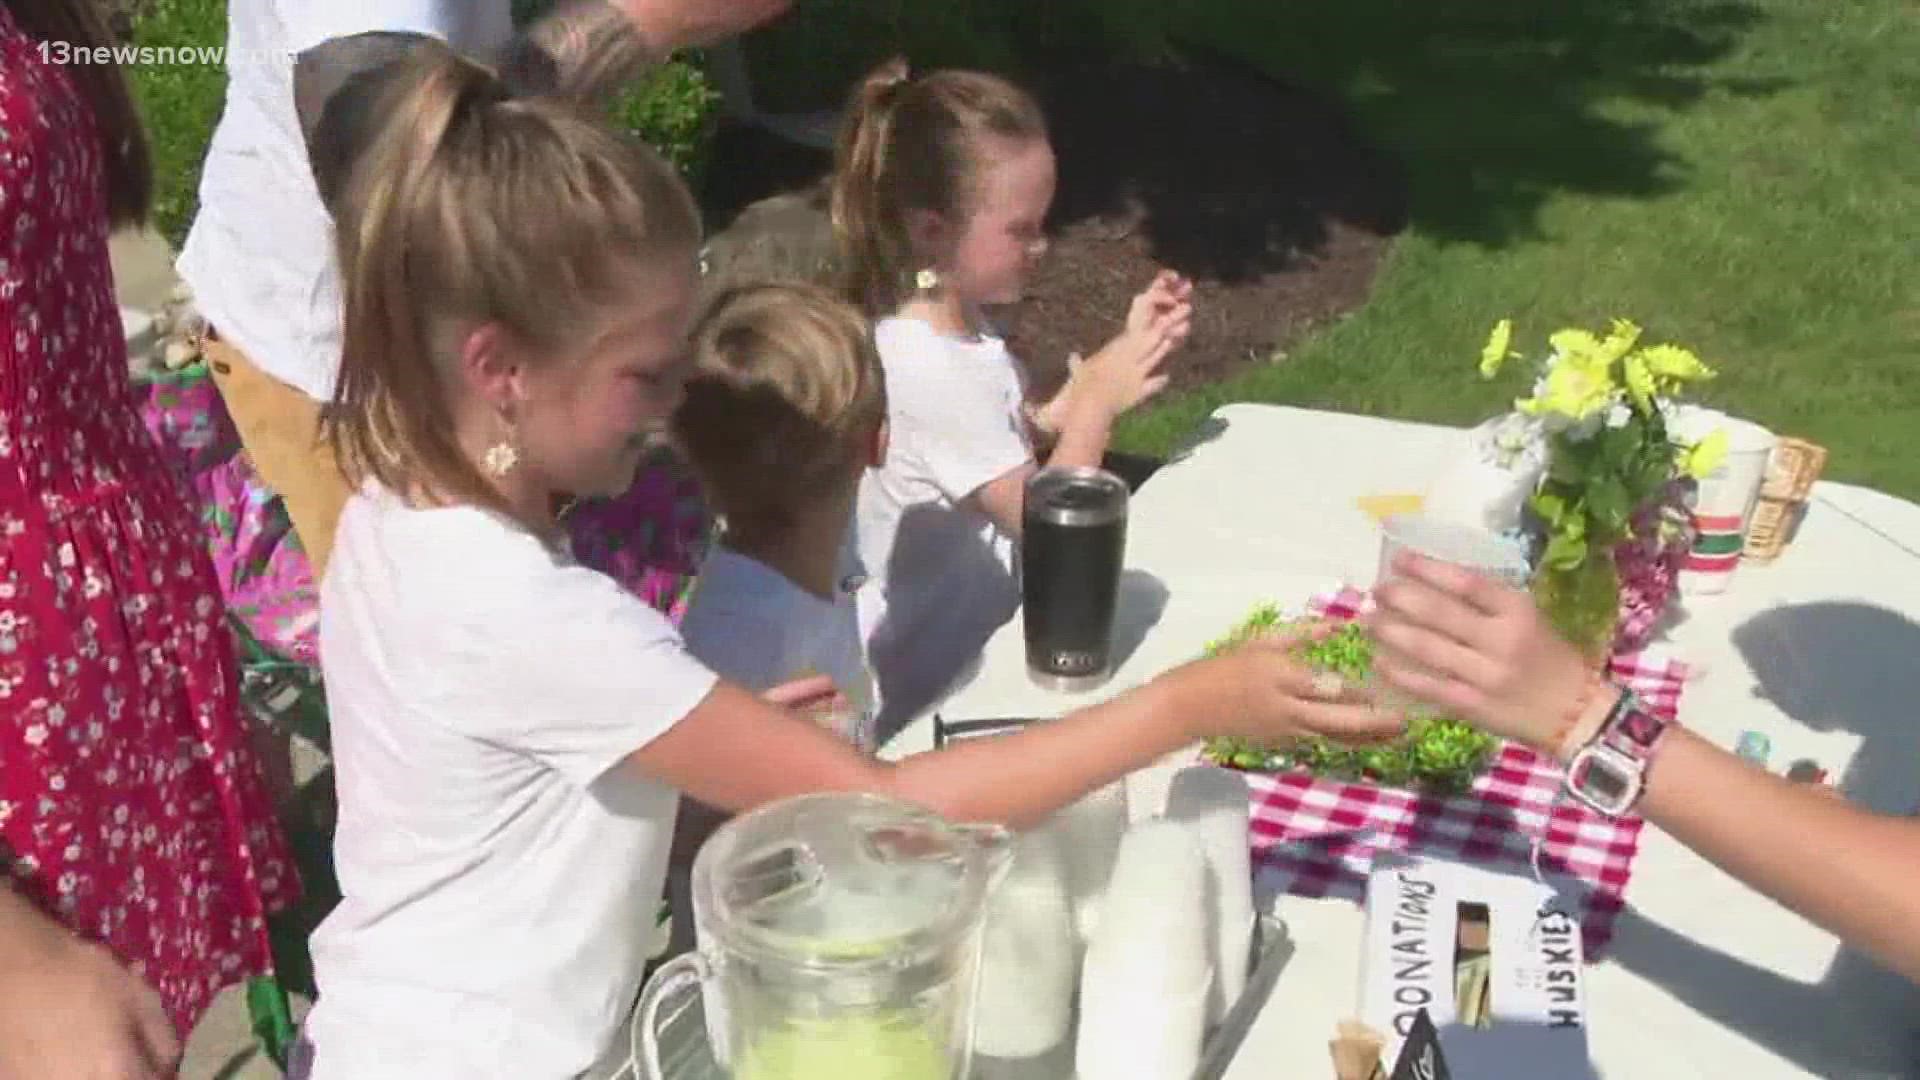 The Smith siblings decided to open up a lemonade stand and sell treats to help the dogs.